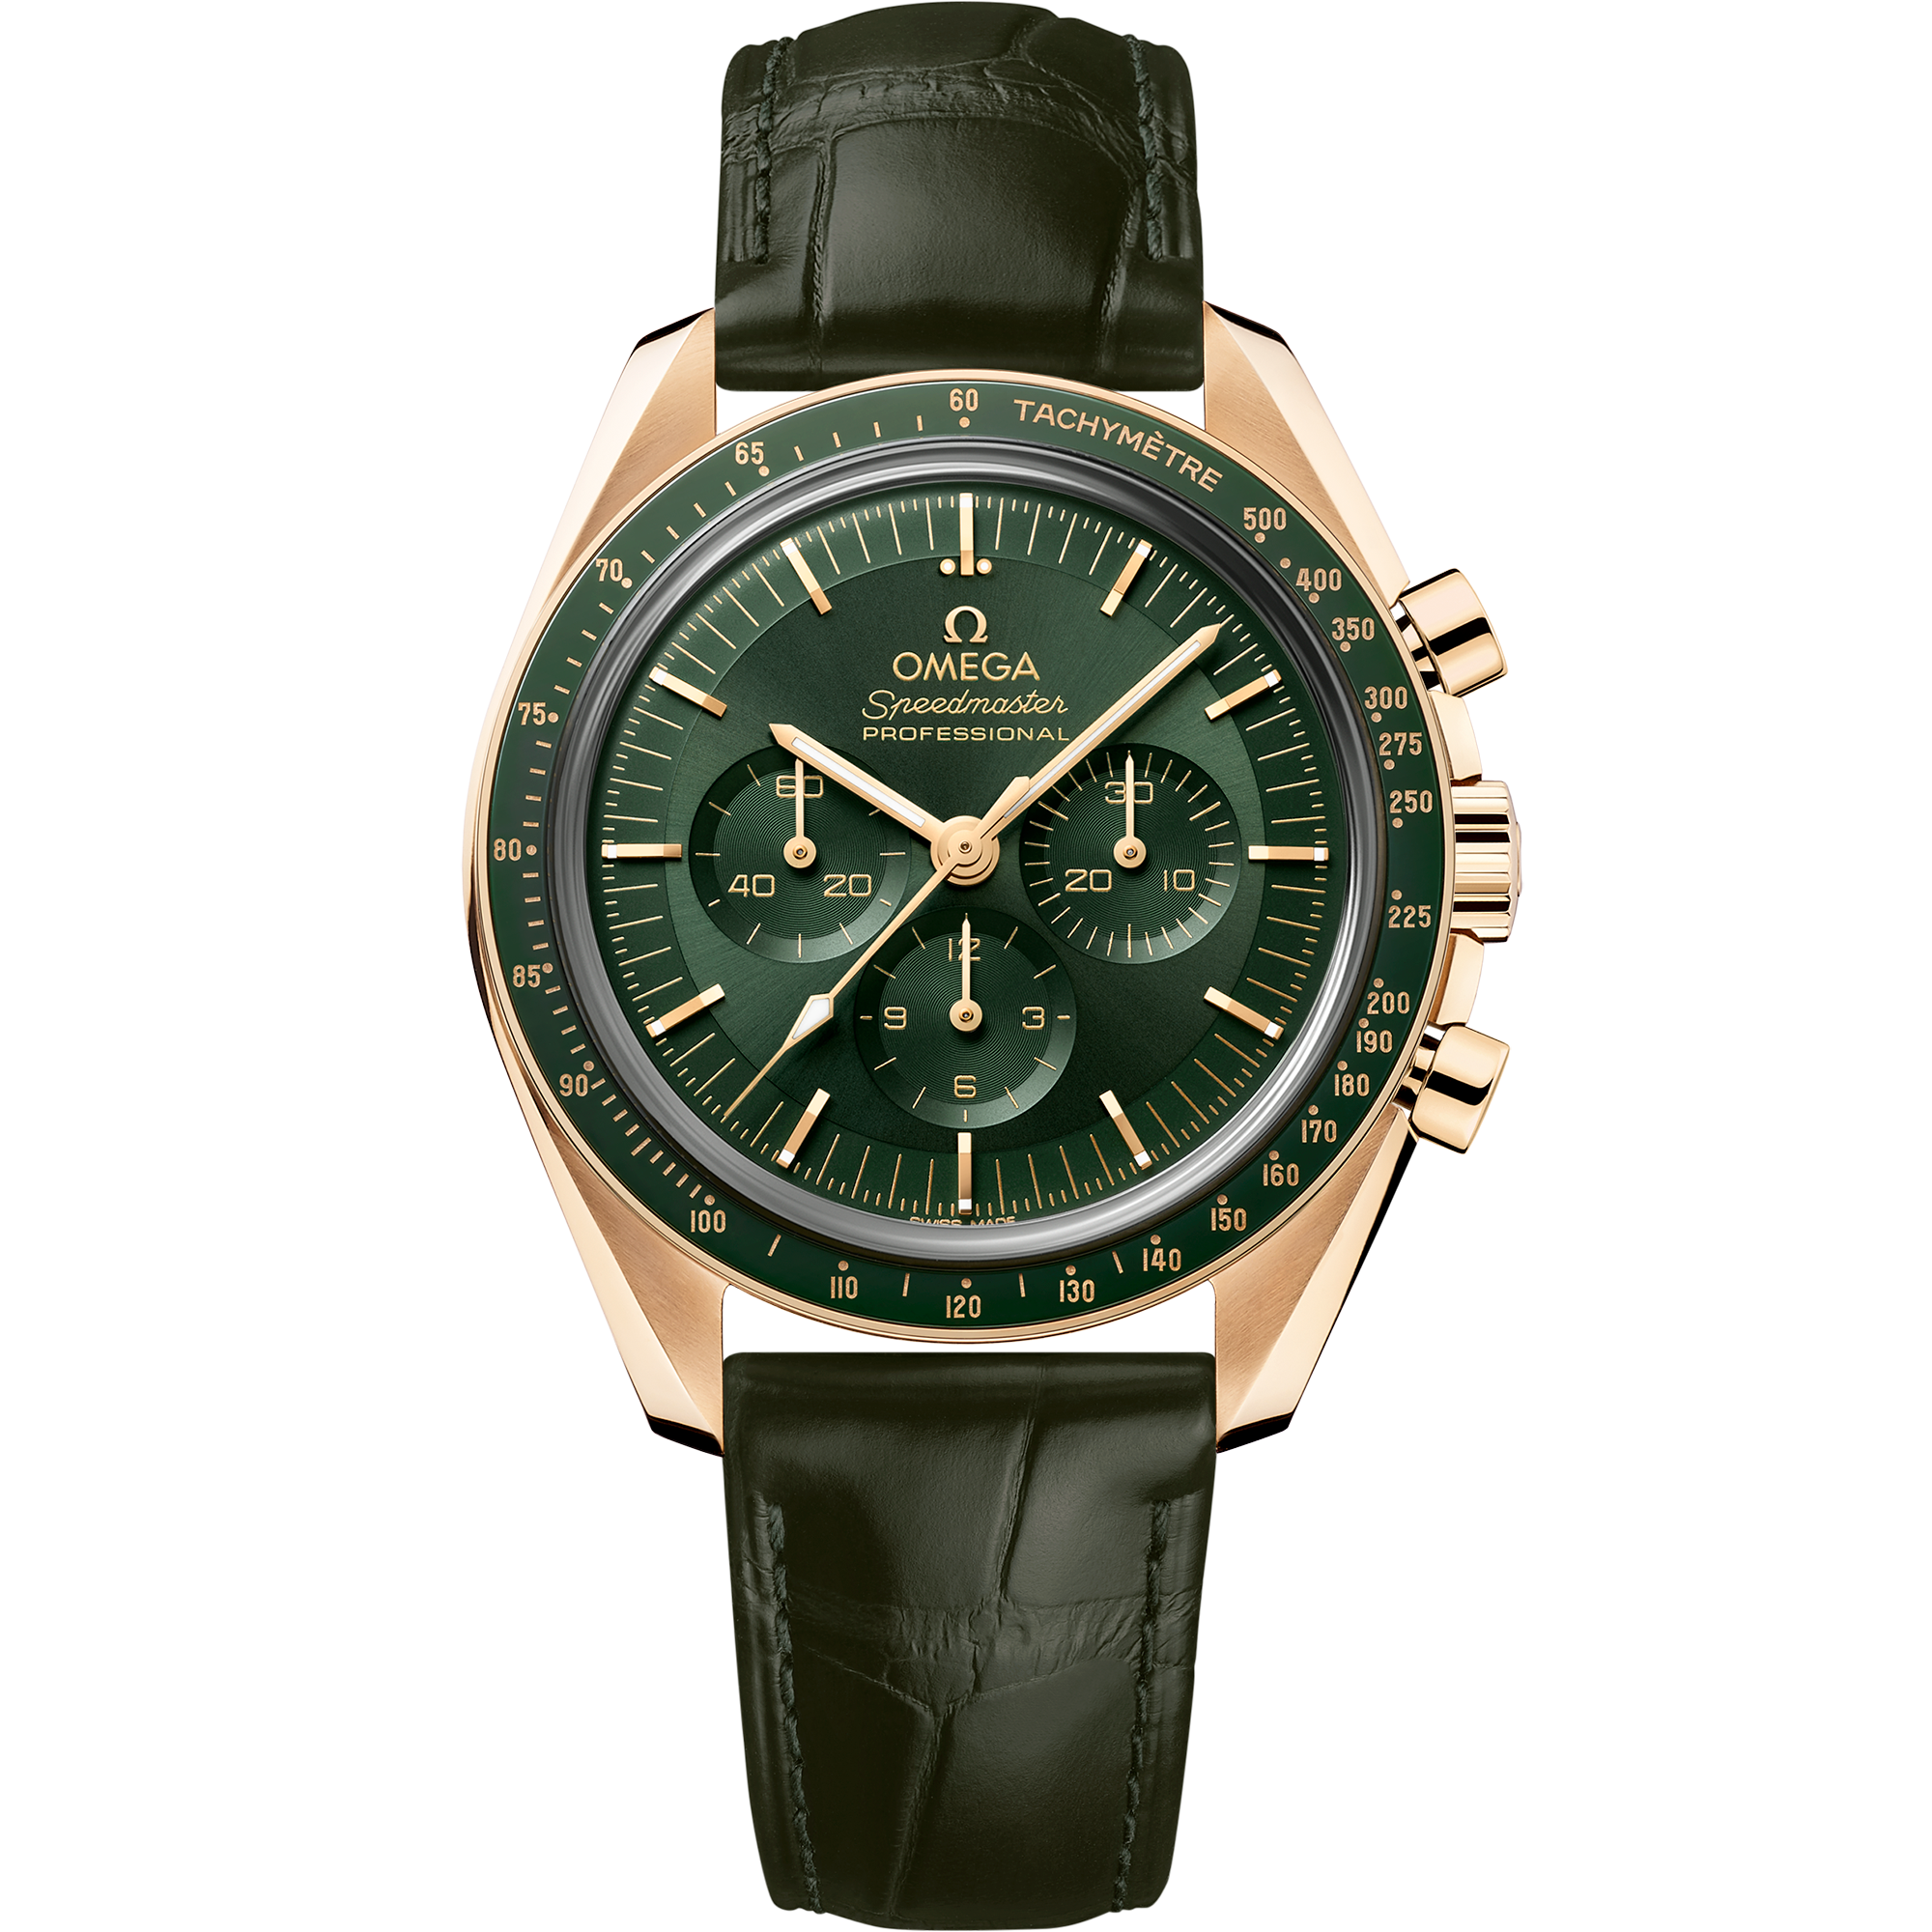 Speedmaster Moonwatch Professional 42 mm, Moonshine™ gold on leather strap - 310.63.42.50.10.001